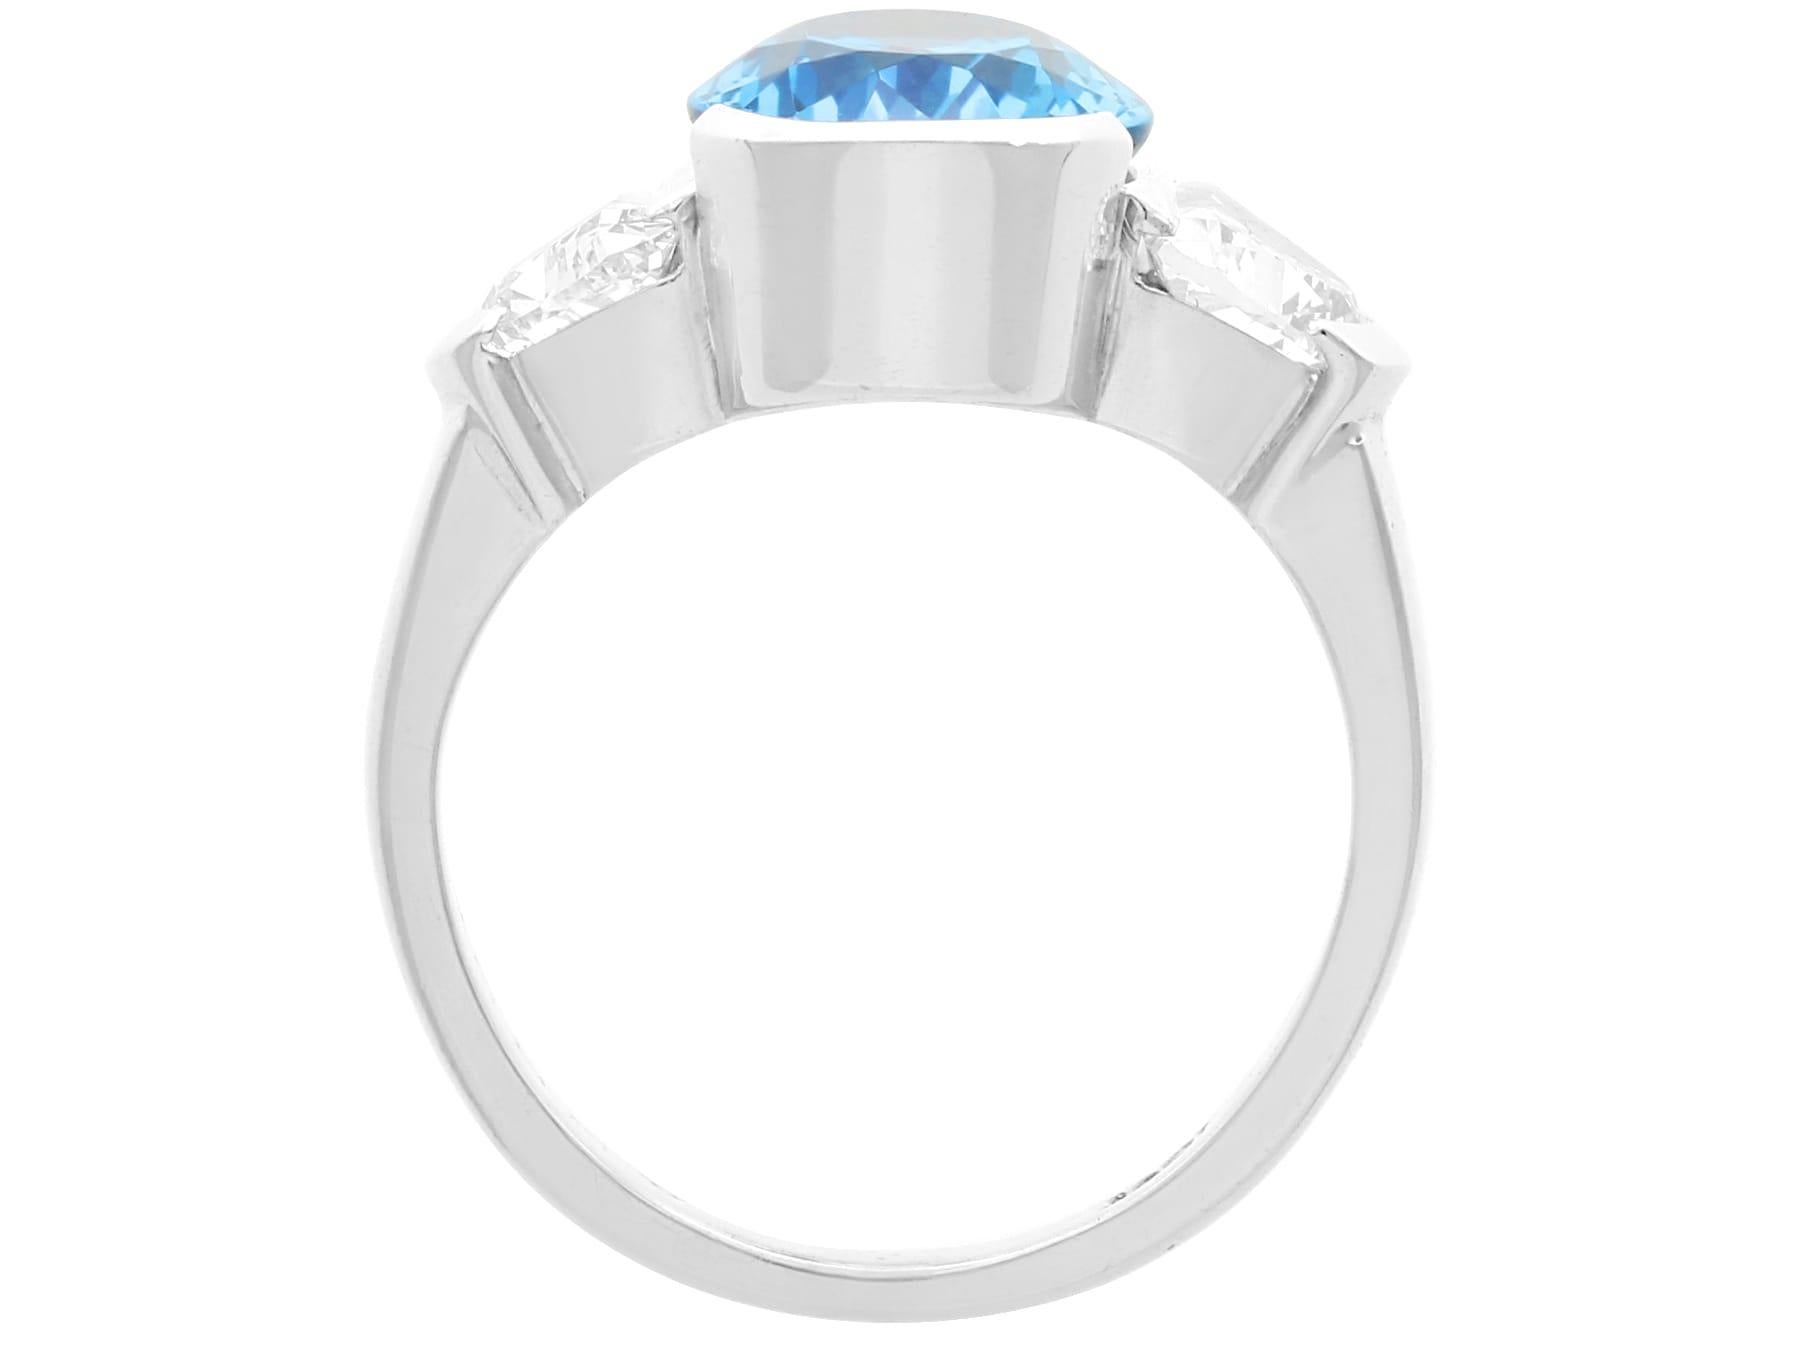 3.28Ct Aquamarine and 1.68Ct Diamond 18k White Gold Cocktail Ring Circa 2000 For Sale 1